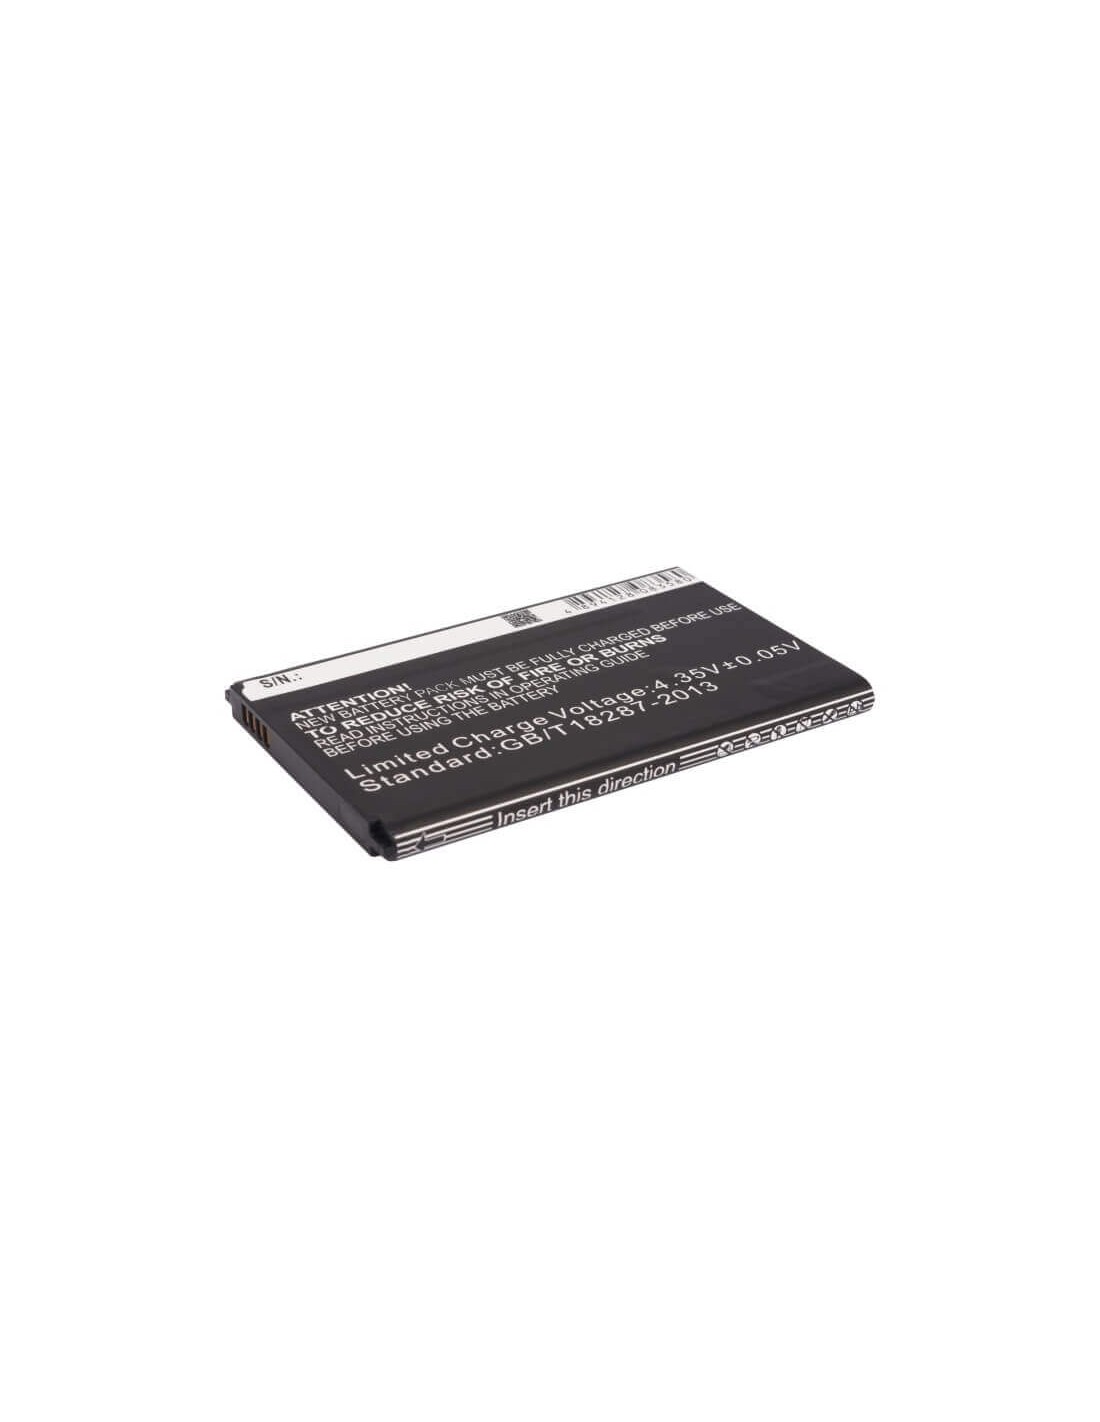 Battery for Samsung Galaxy Note 3 Neo, Galaxy Note 3 Mini, SM-N7505 3.8V, 1800mAh - 6.84Wh